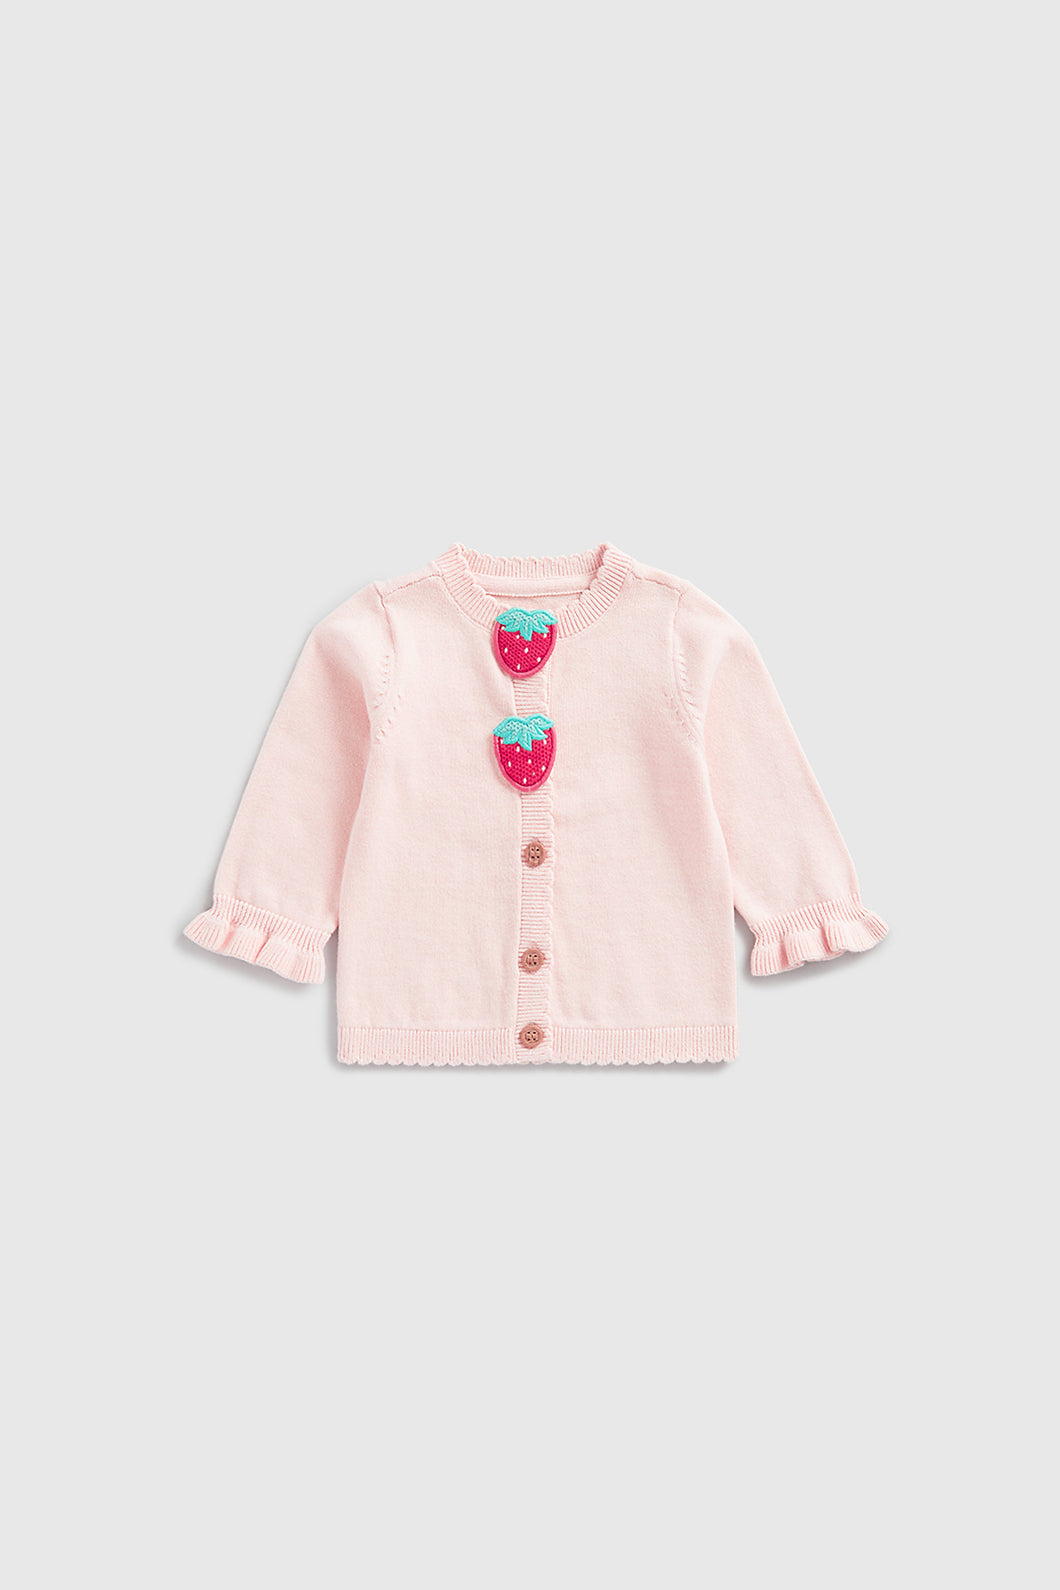 Mothercare Pink Strawberry Cardigan